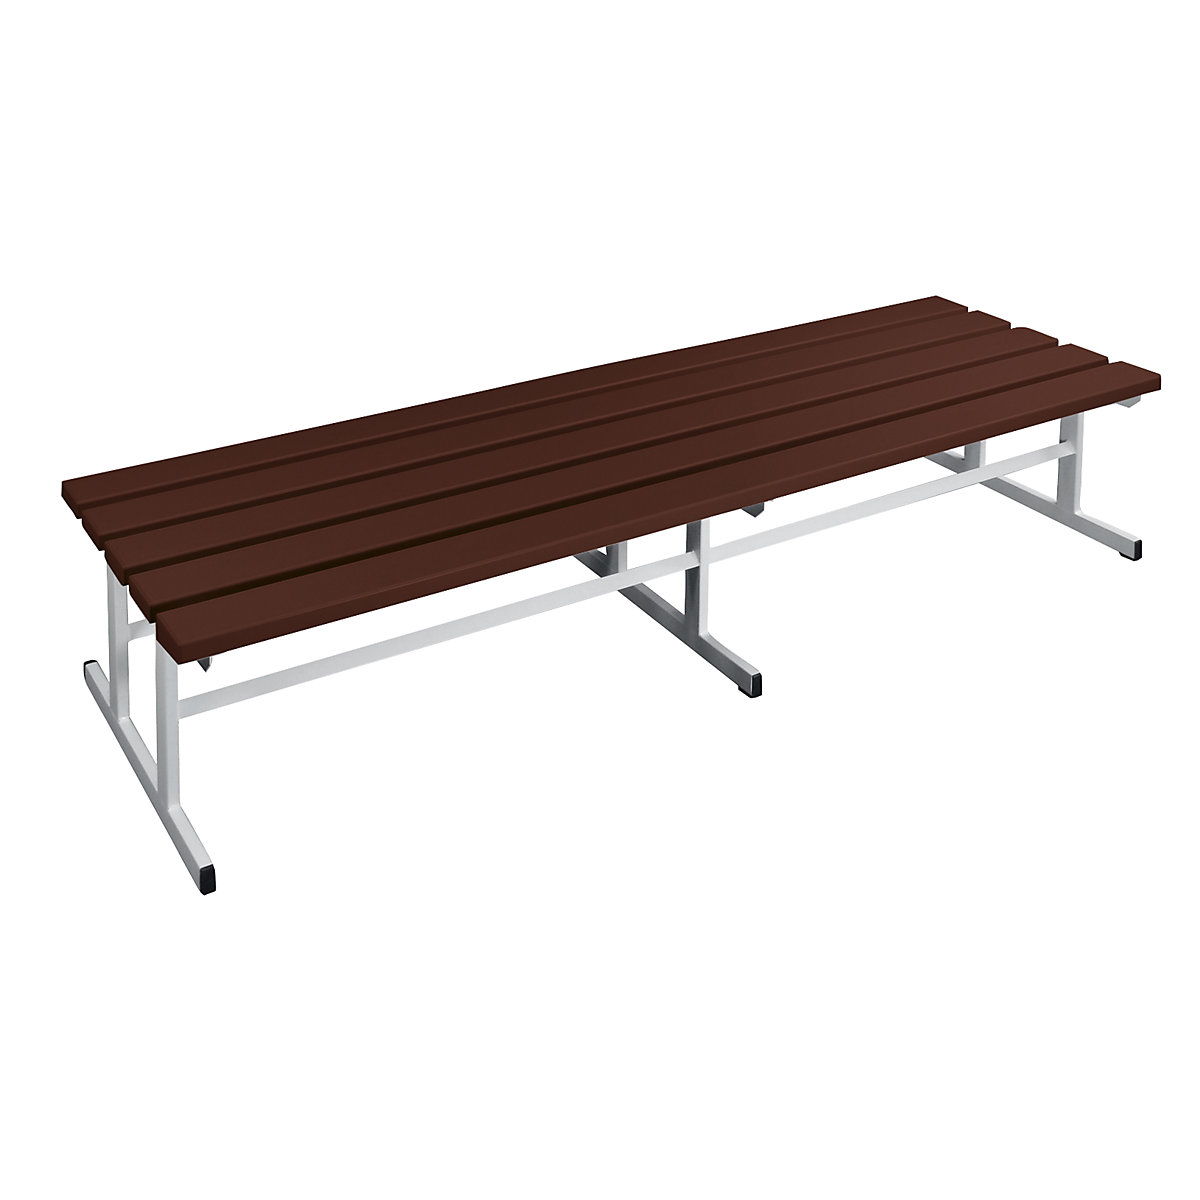 Wolf – Cloakroom bench, double sided seat, brown, 2000 mm length